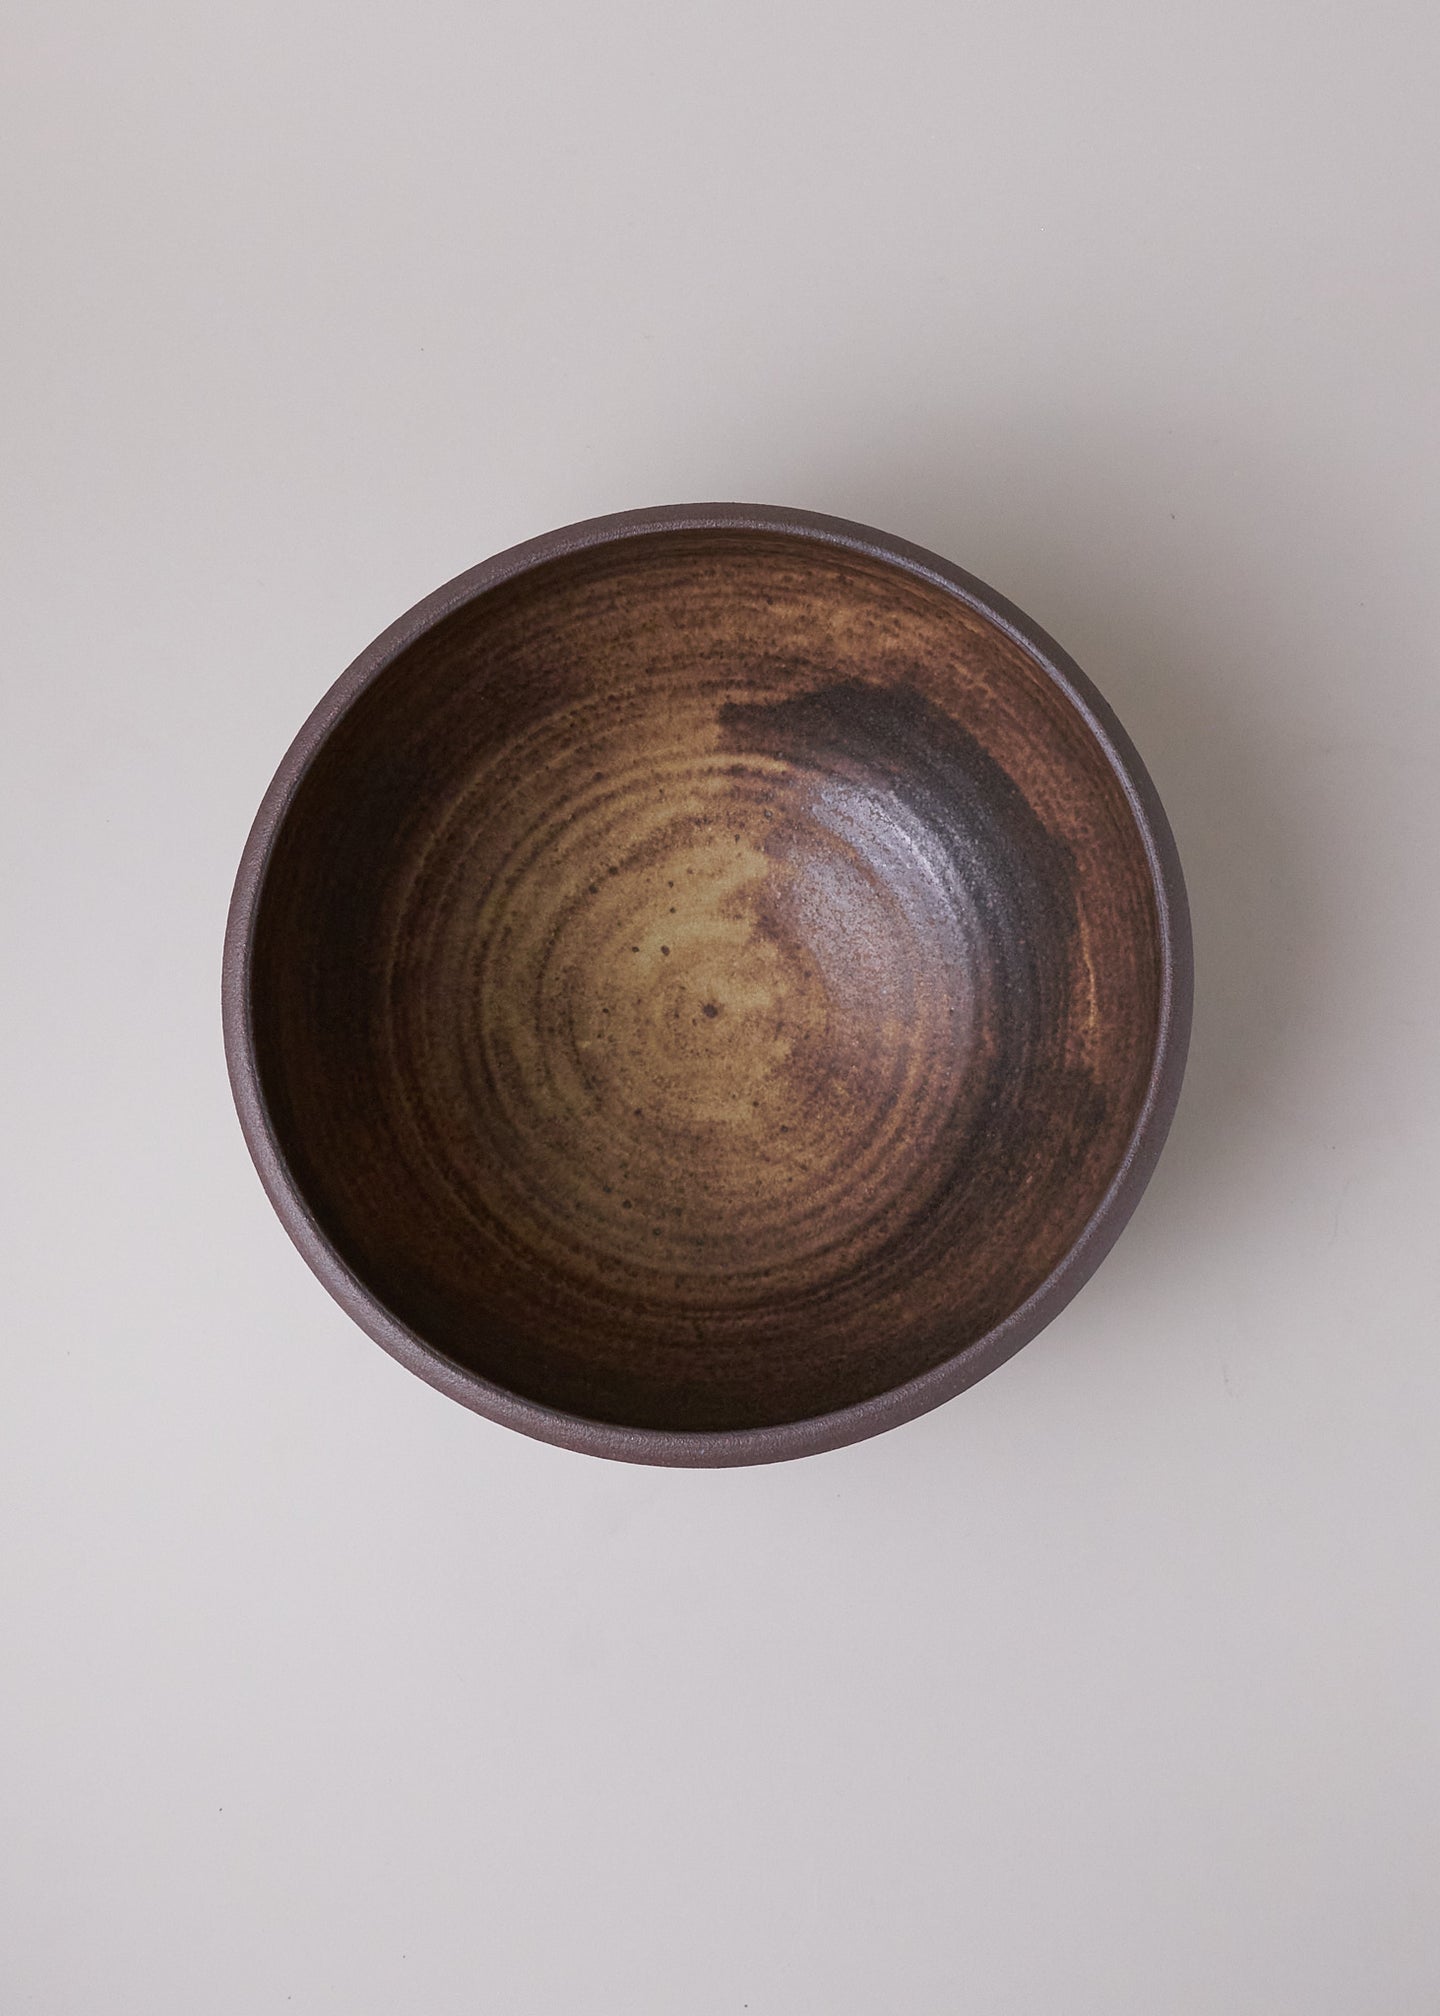 Large Lucy Bowl in Live Oak - Victoria Morris Pottery